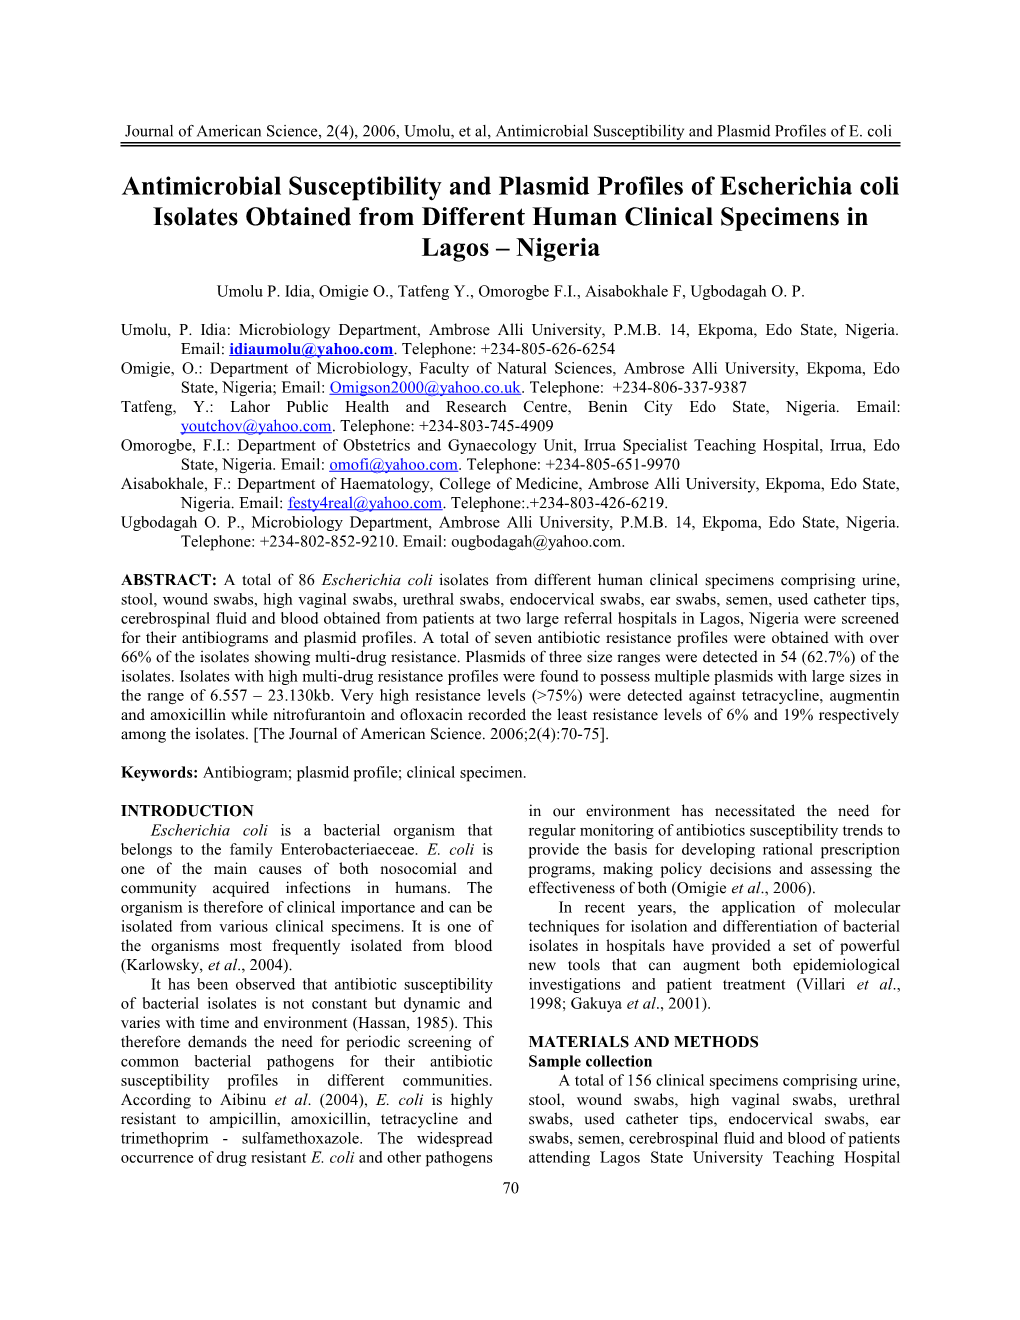 Antimicrobial Susceptibility and Plasmid Profiles of Escherichia Coli Isolates Obtained